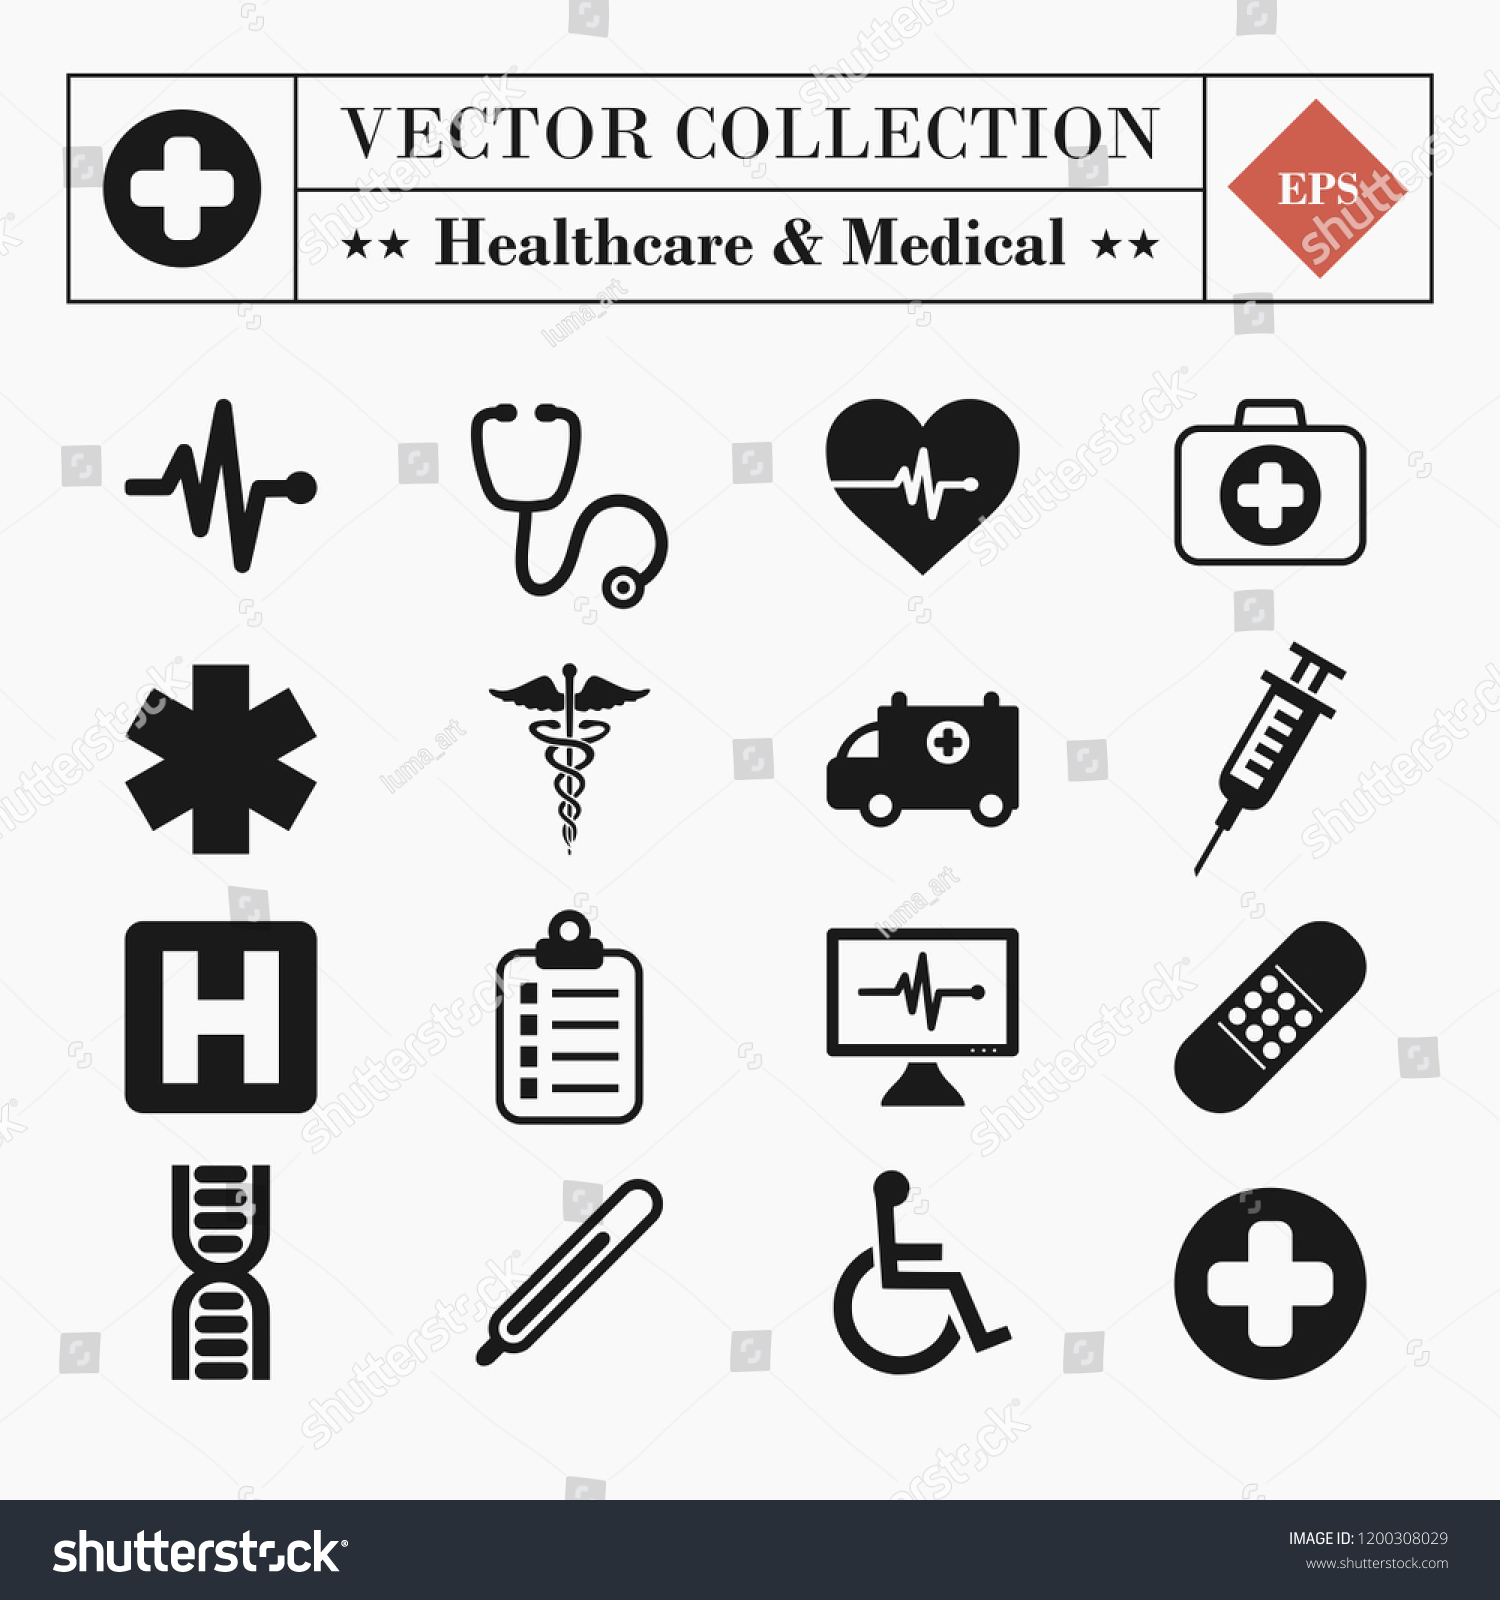 Vector set collection of 16 medical and healthcare related icons isolated on white background #1200308029